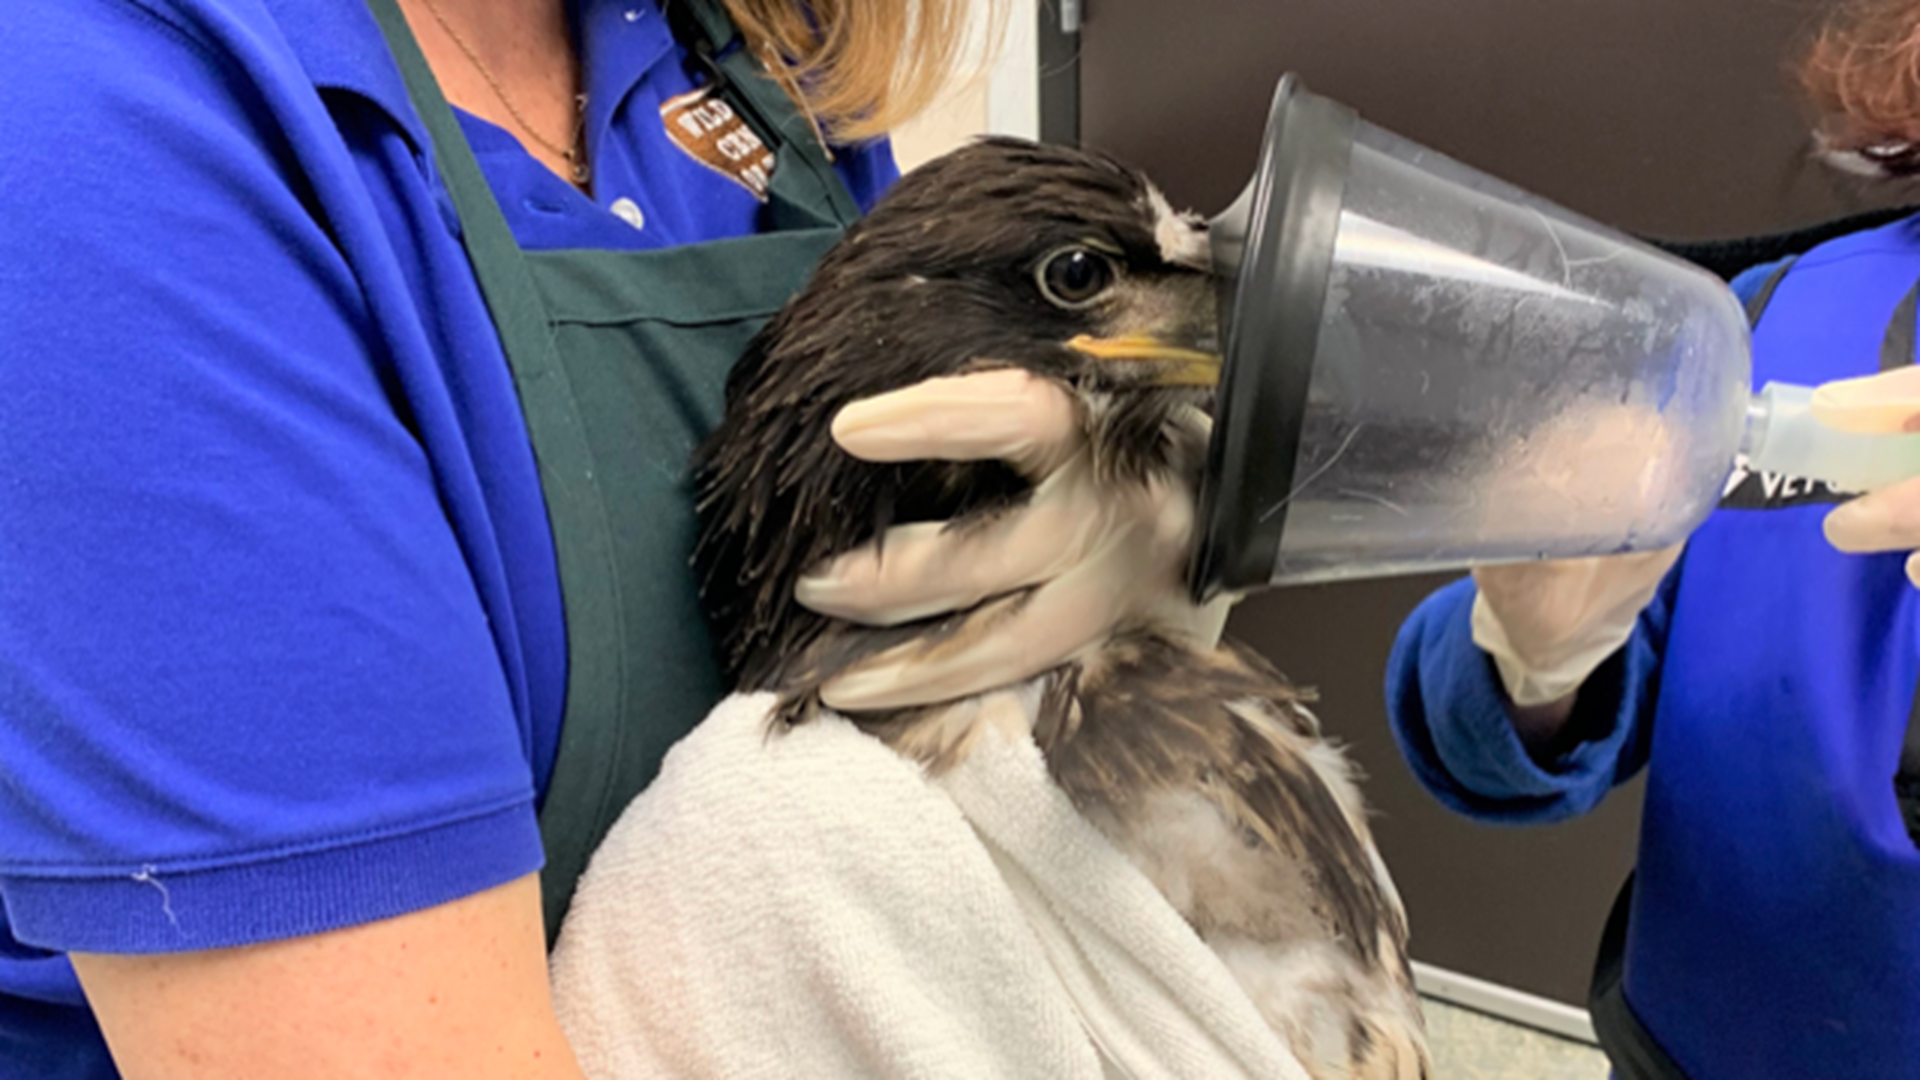 A young bald eagle that fell out of her nest last week in Webster is continuing to improve at the Houston SPCA’s Wildlife Center in Texas.